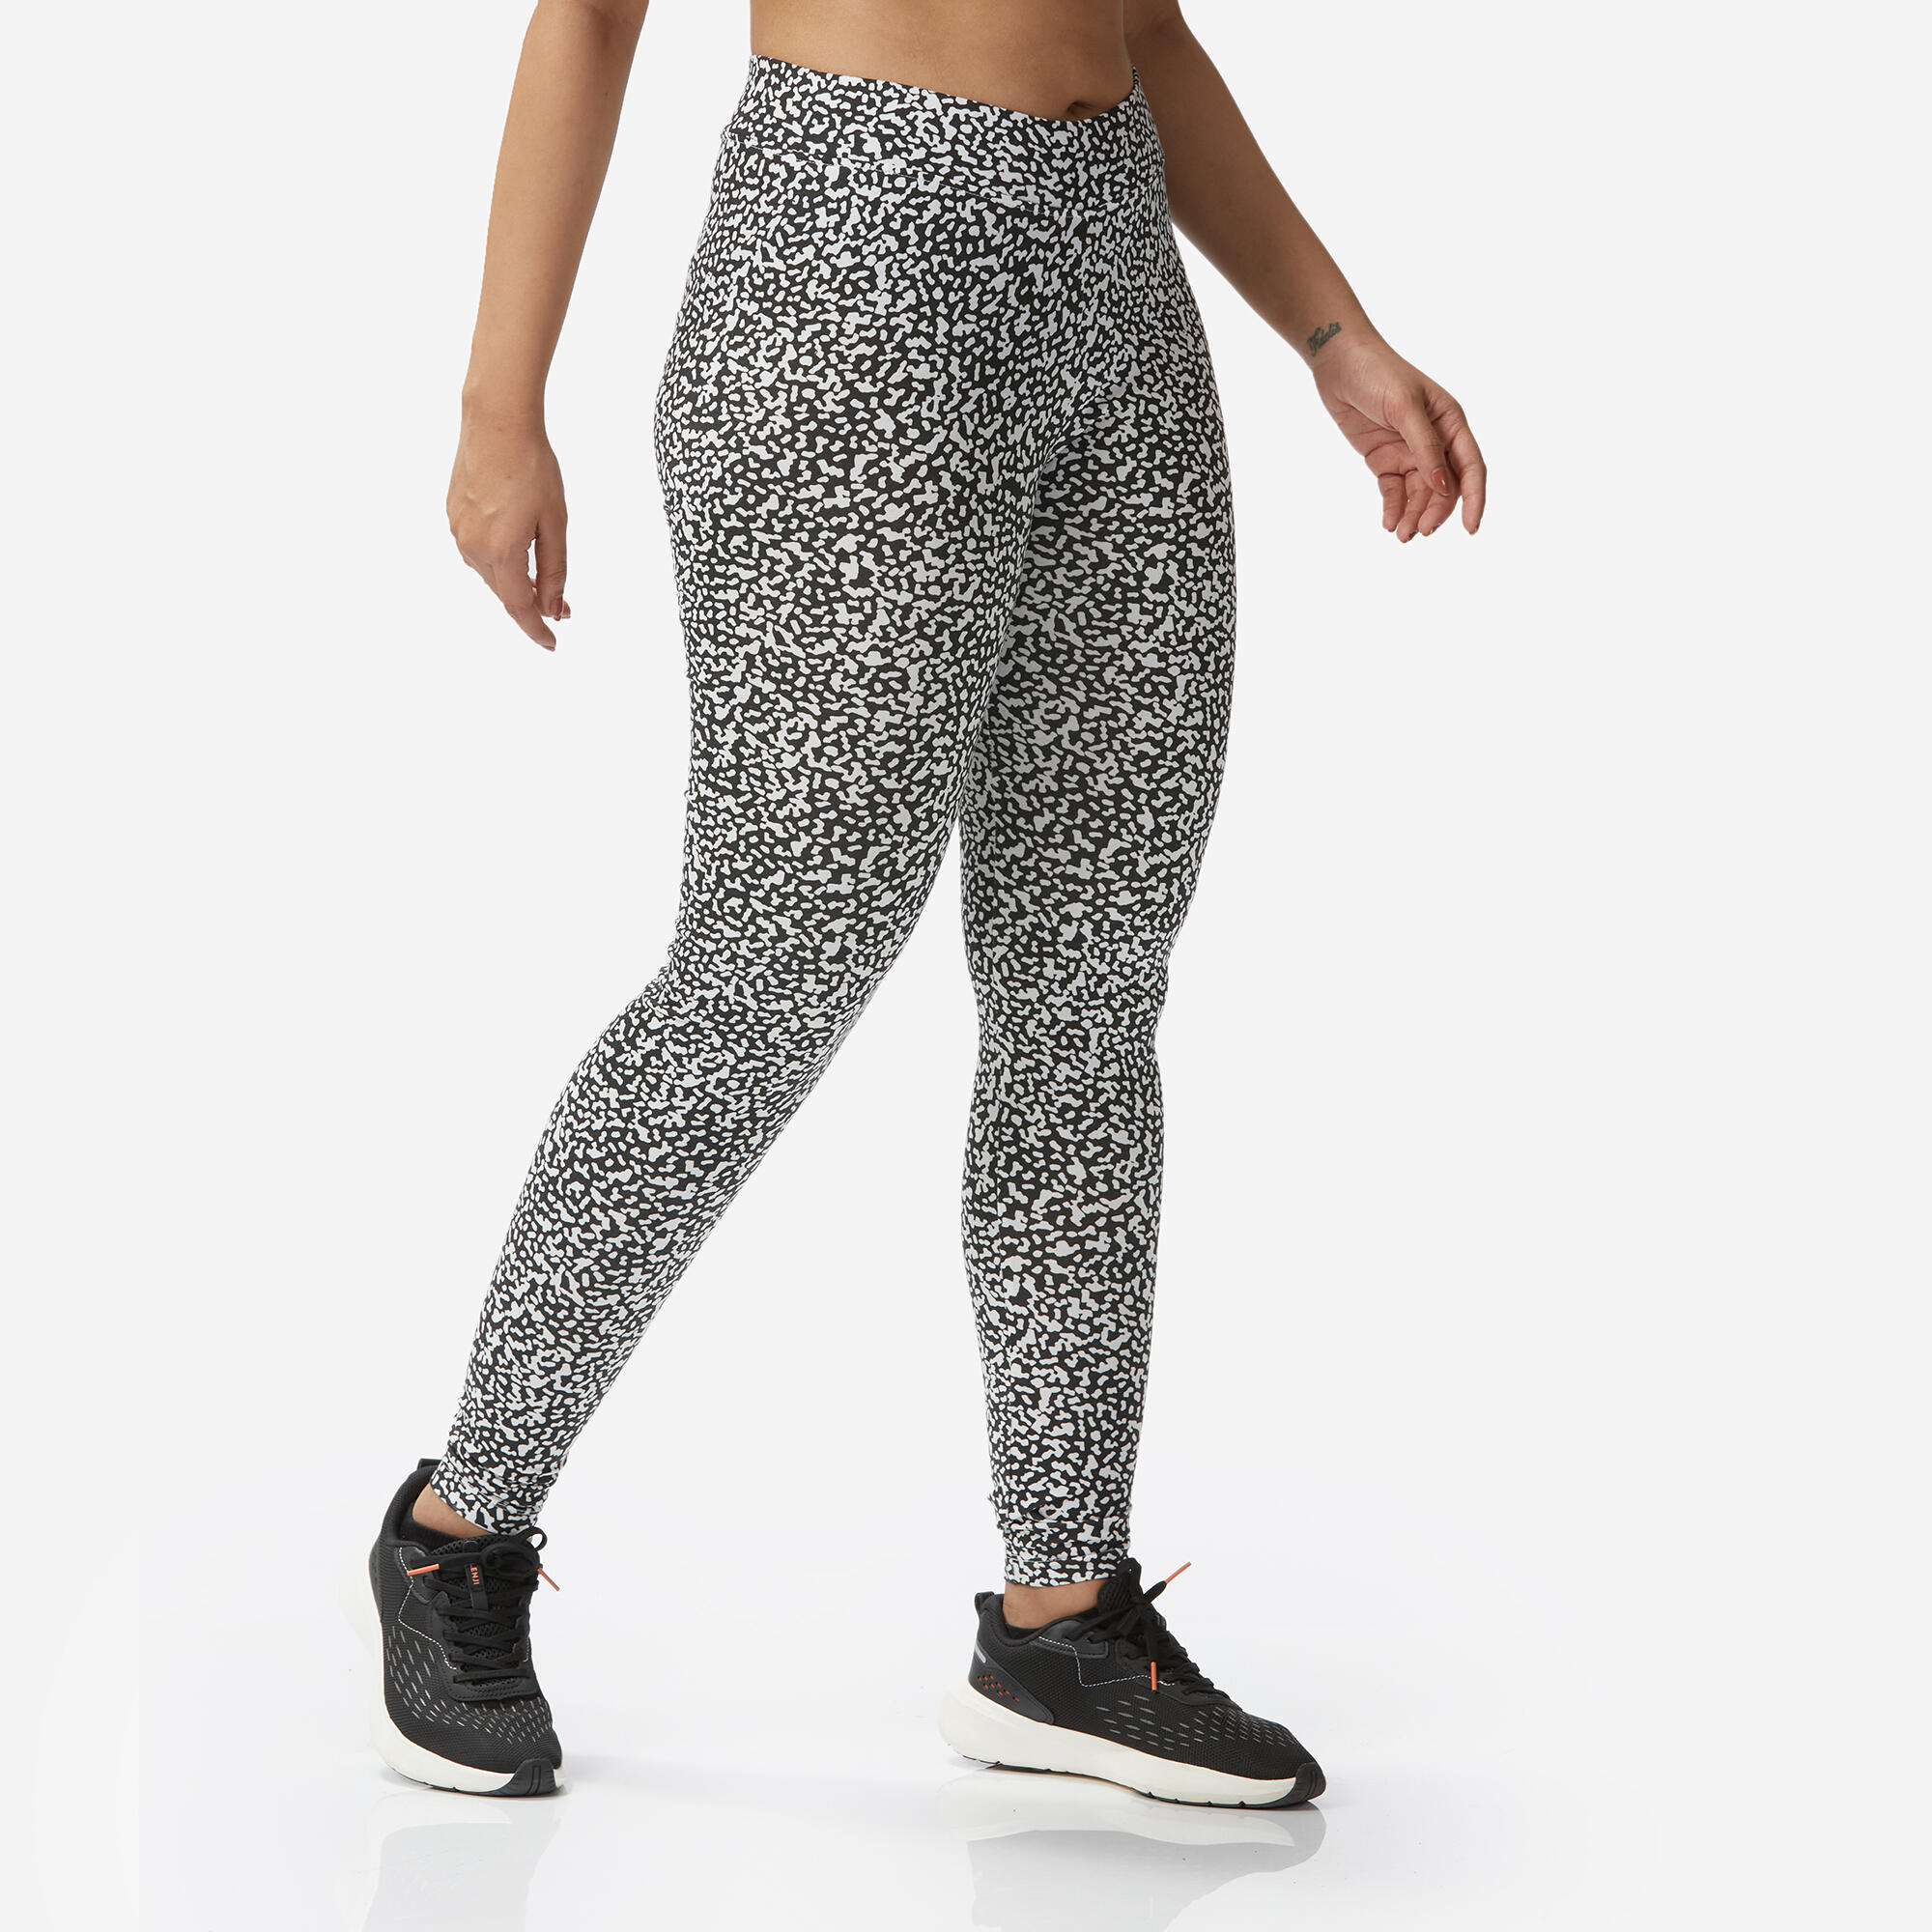 7 Reasons to Wear Gym Leggings When You Exercise